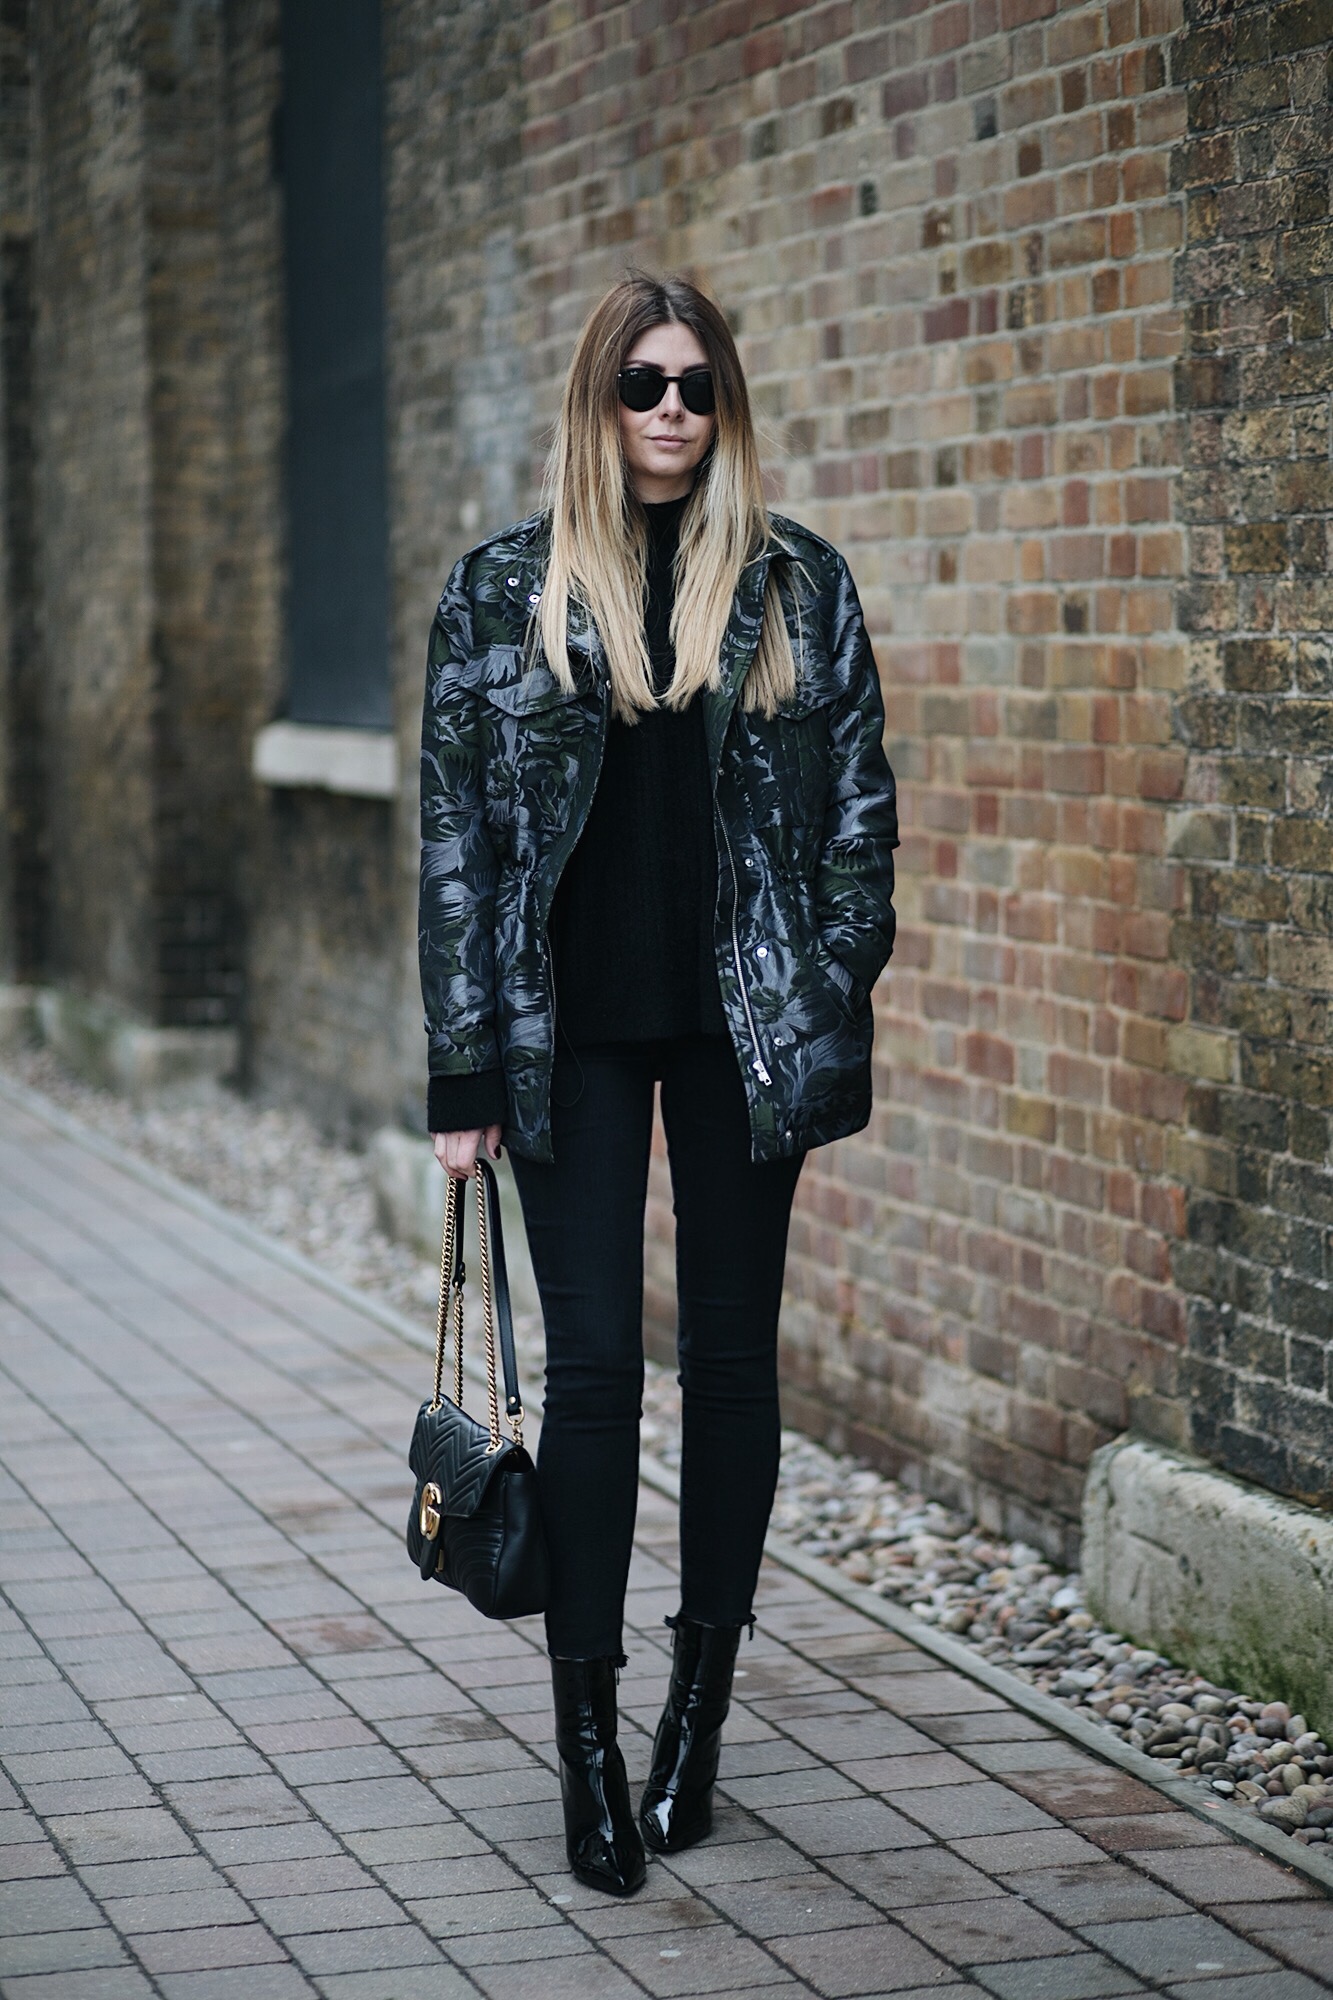 Emma Hill - EJSTYLE wears khaki & silver floral jacquard jacket, black sweater, medium Gucci Marmont bag. black Paige skinny jeans, patent pic vinyl ankle boots, winter outfit